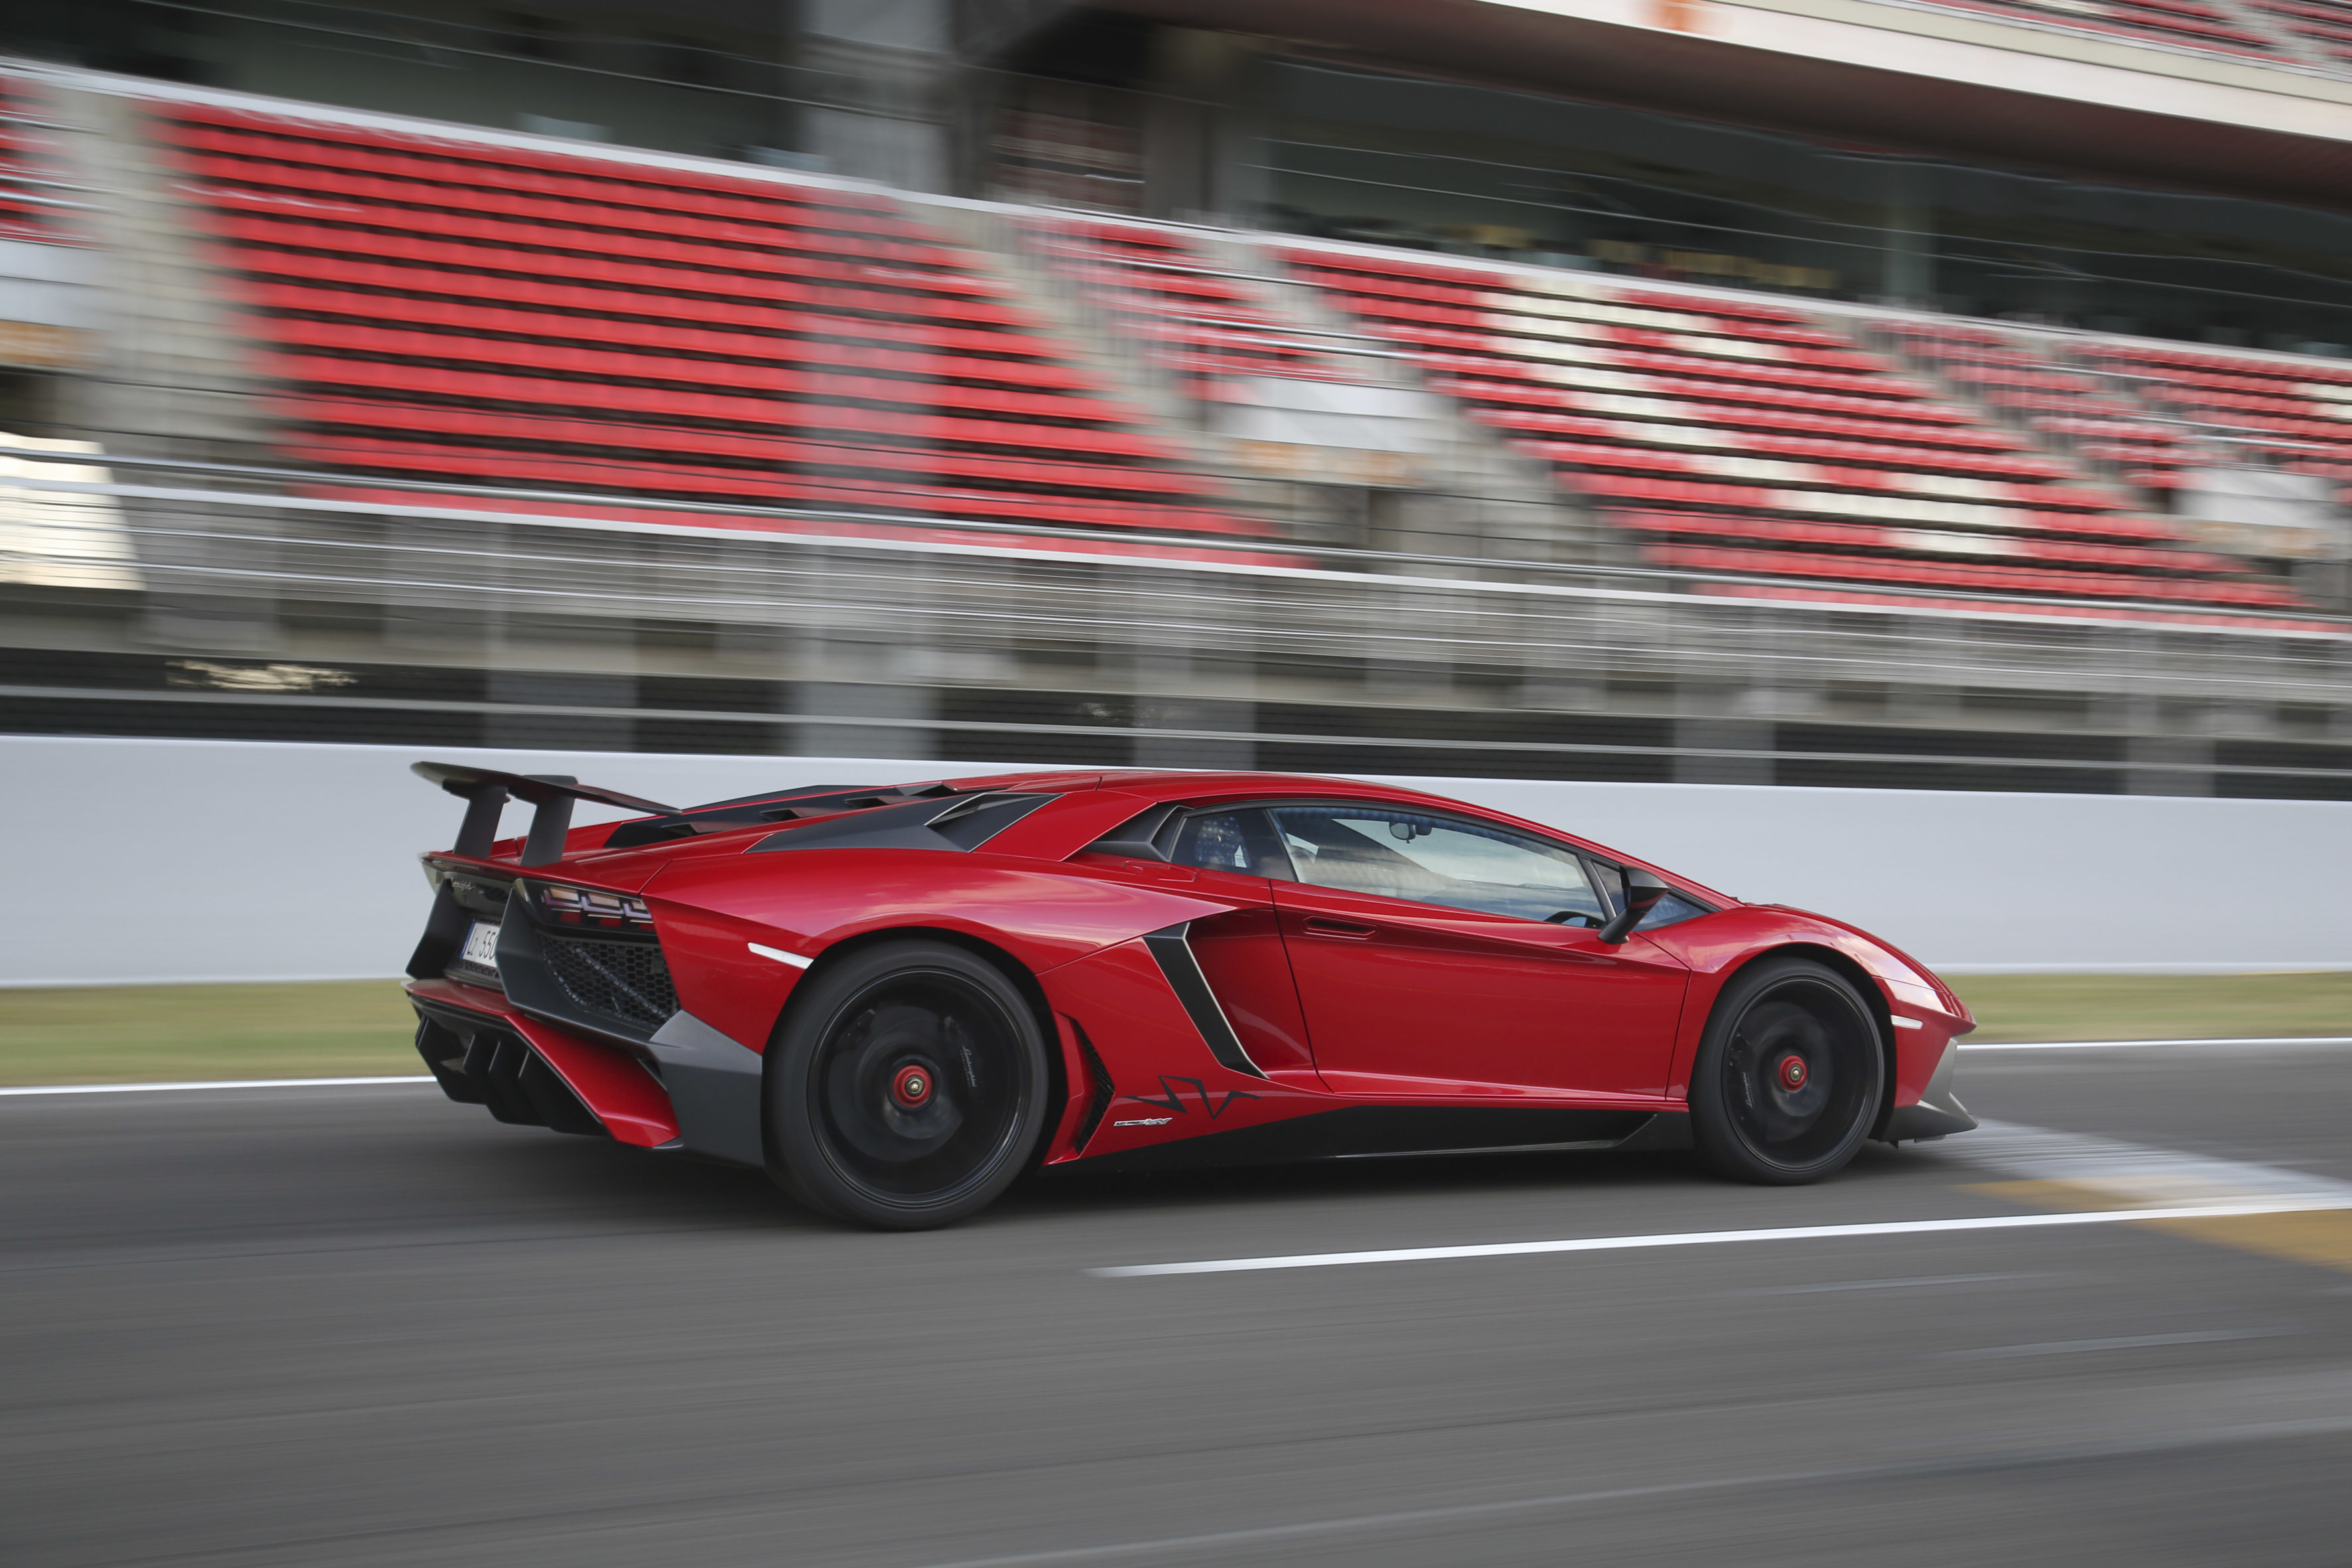 51993 download wallpaper lamborghini, cars, side view, aventador, lp 750-4 screensavers and pictures for free